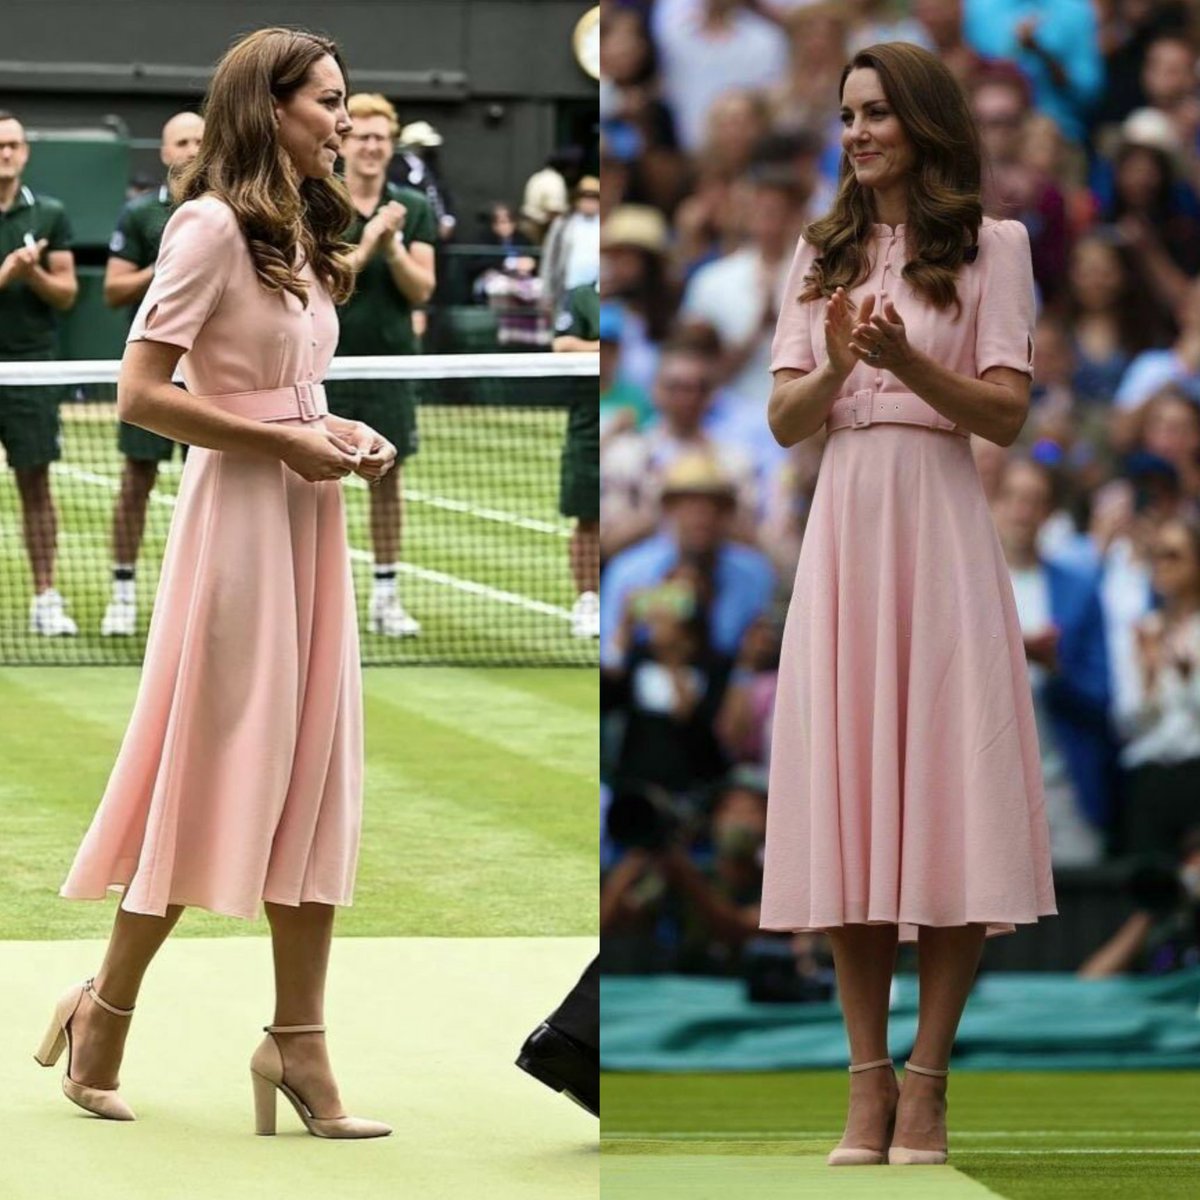 Princess Catherine is exceptionally beautiful attending Wimbledon on 11 July 2021. 
#PrincessofWales #PrincessCatherine #CatherinePrincessOfWales #TeamCatherine #TeamWales #RoyalFamily #IStandWithCatherine #CatherineWeLoveYou #CatherineIsQueen #PrincessCatherineOfWales